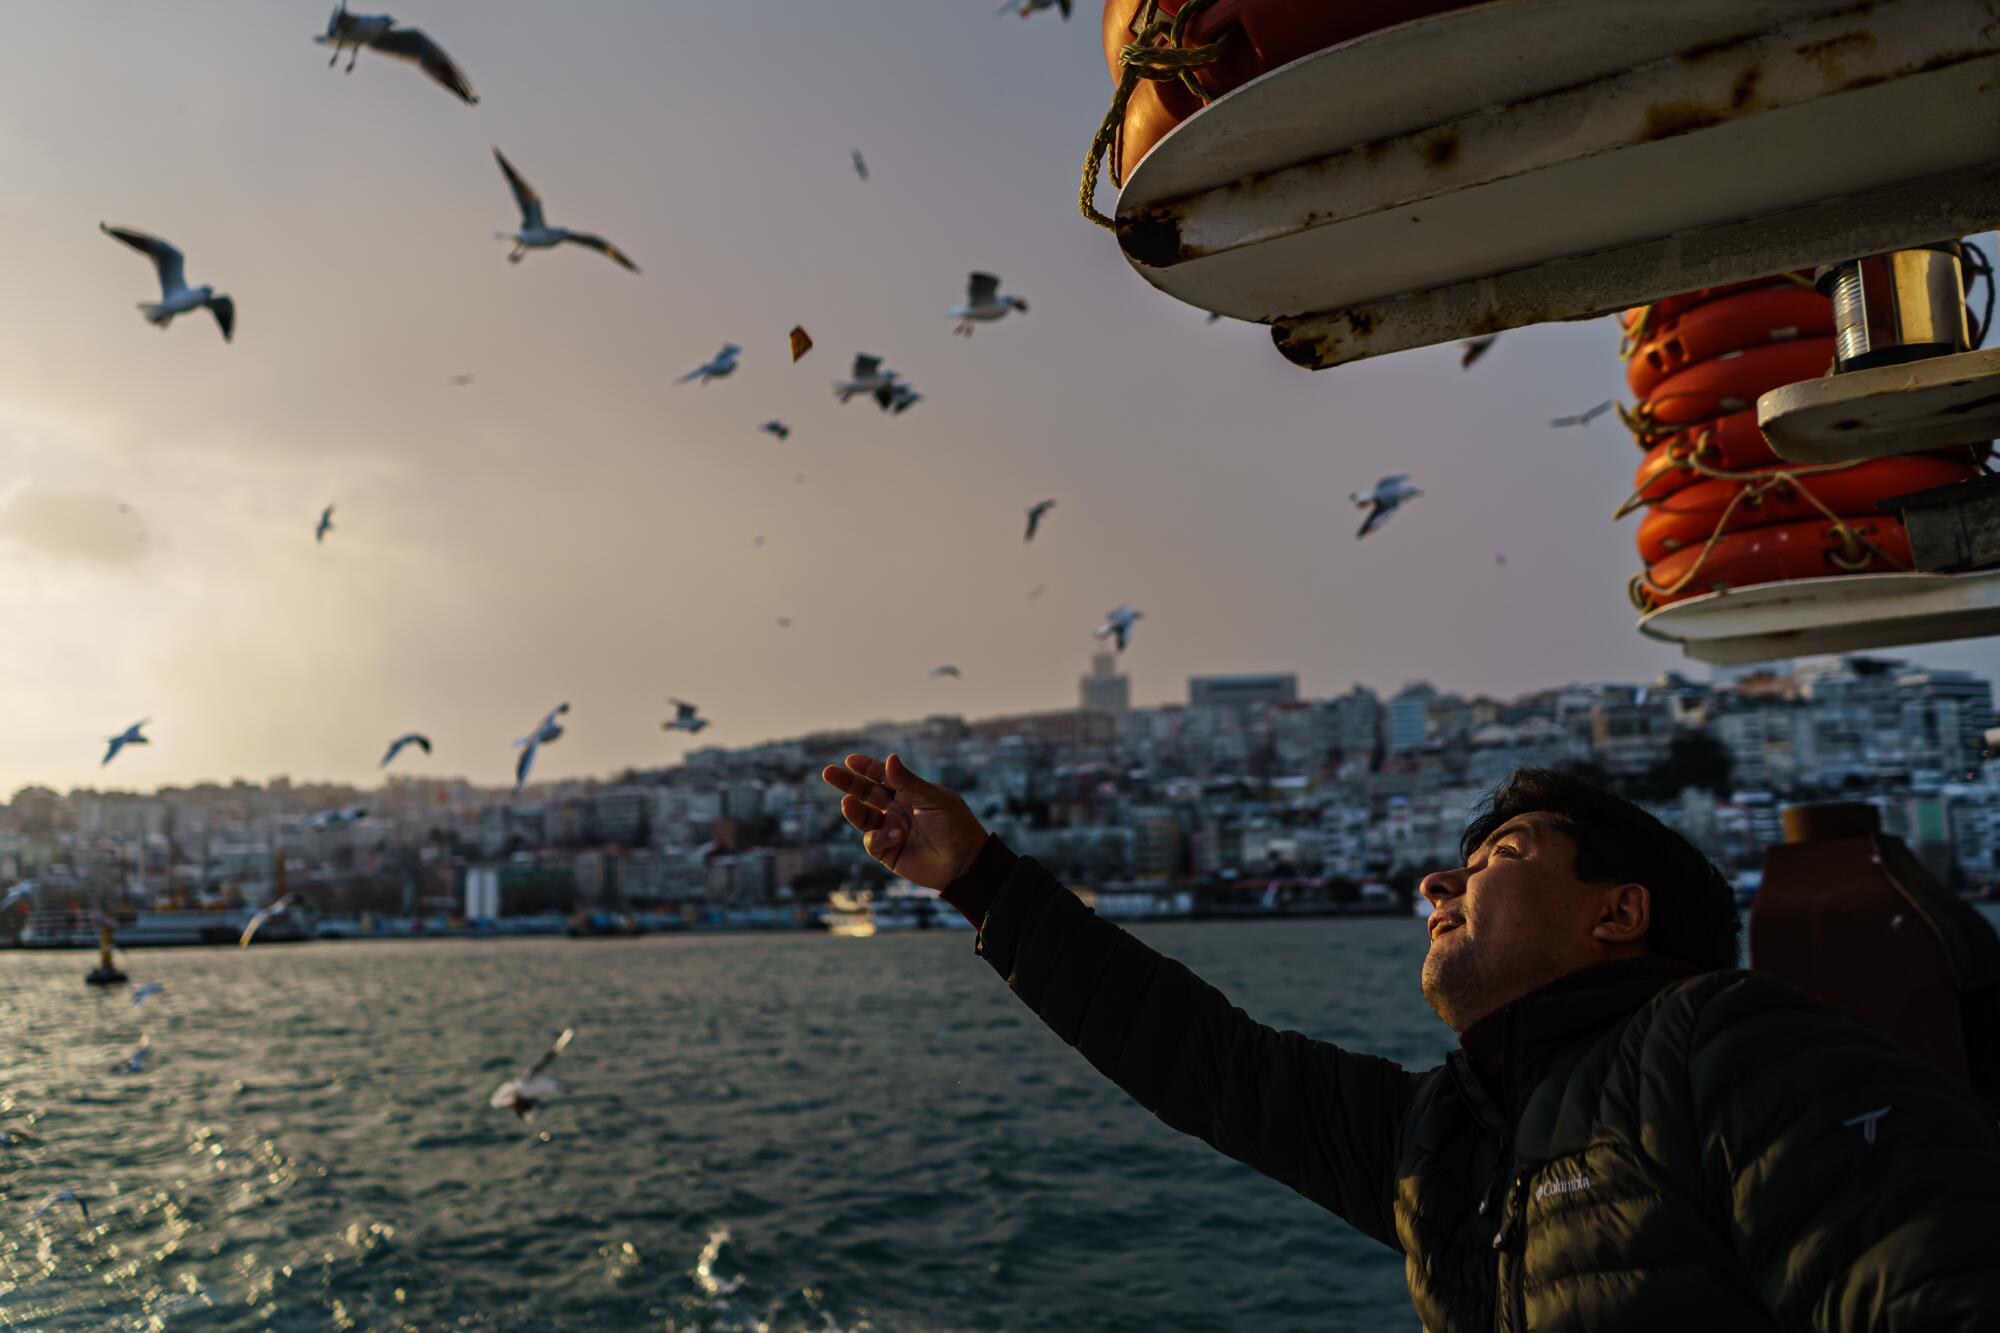 A man on a boat extends his hand against a backdrop of buildings and a flock of birds over the water